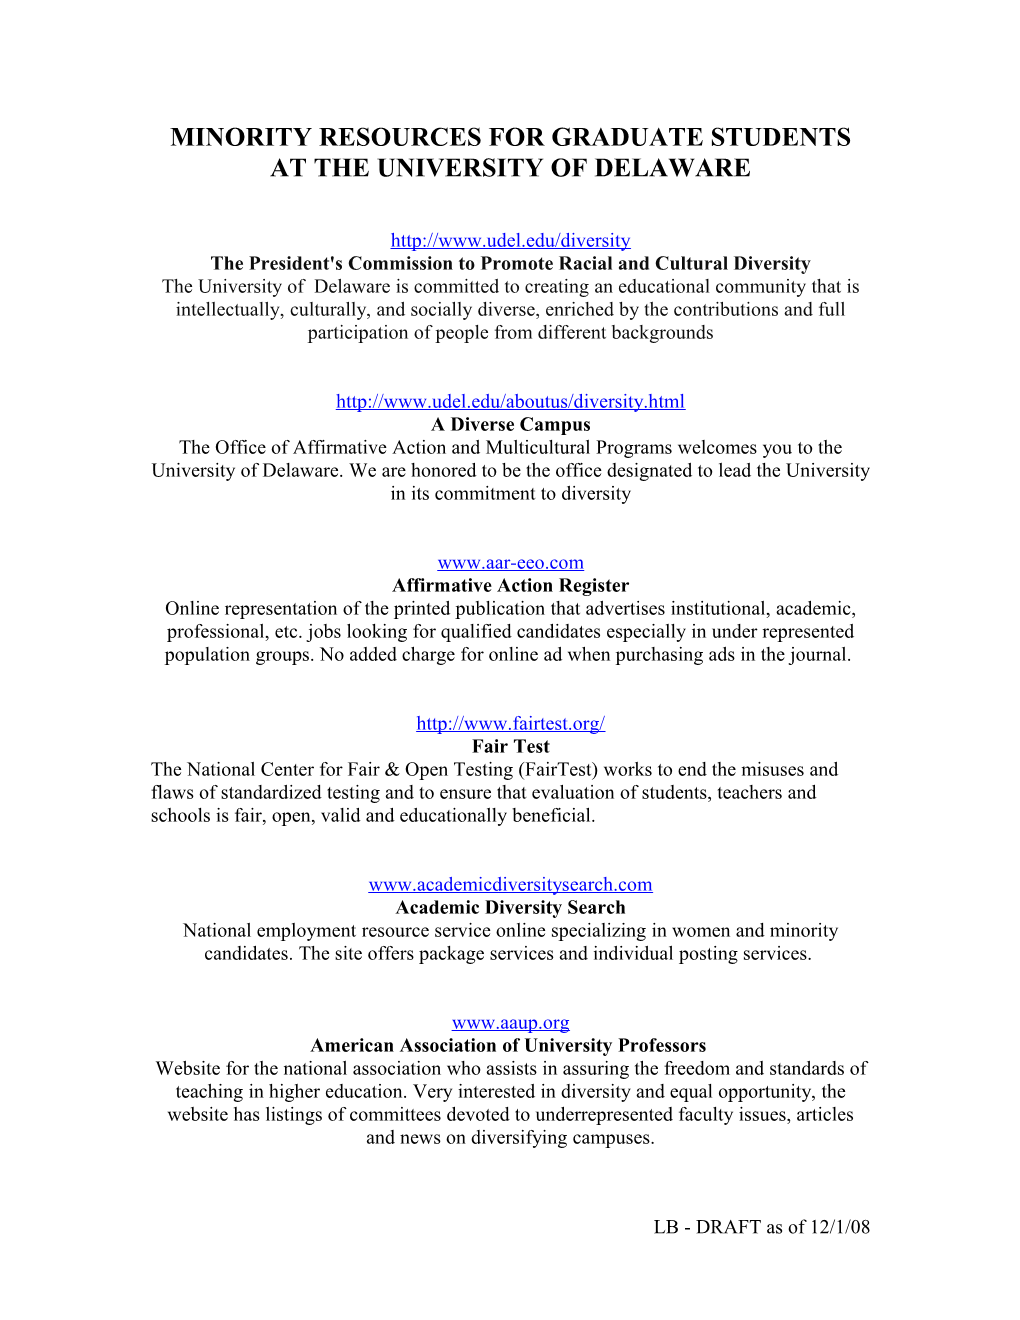 Minority Resources for Graduate Students at the University of Delaware